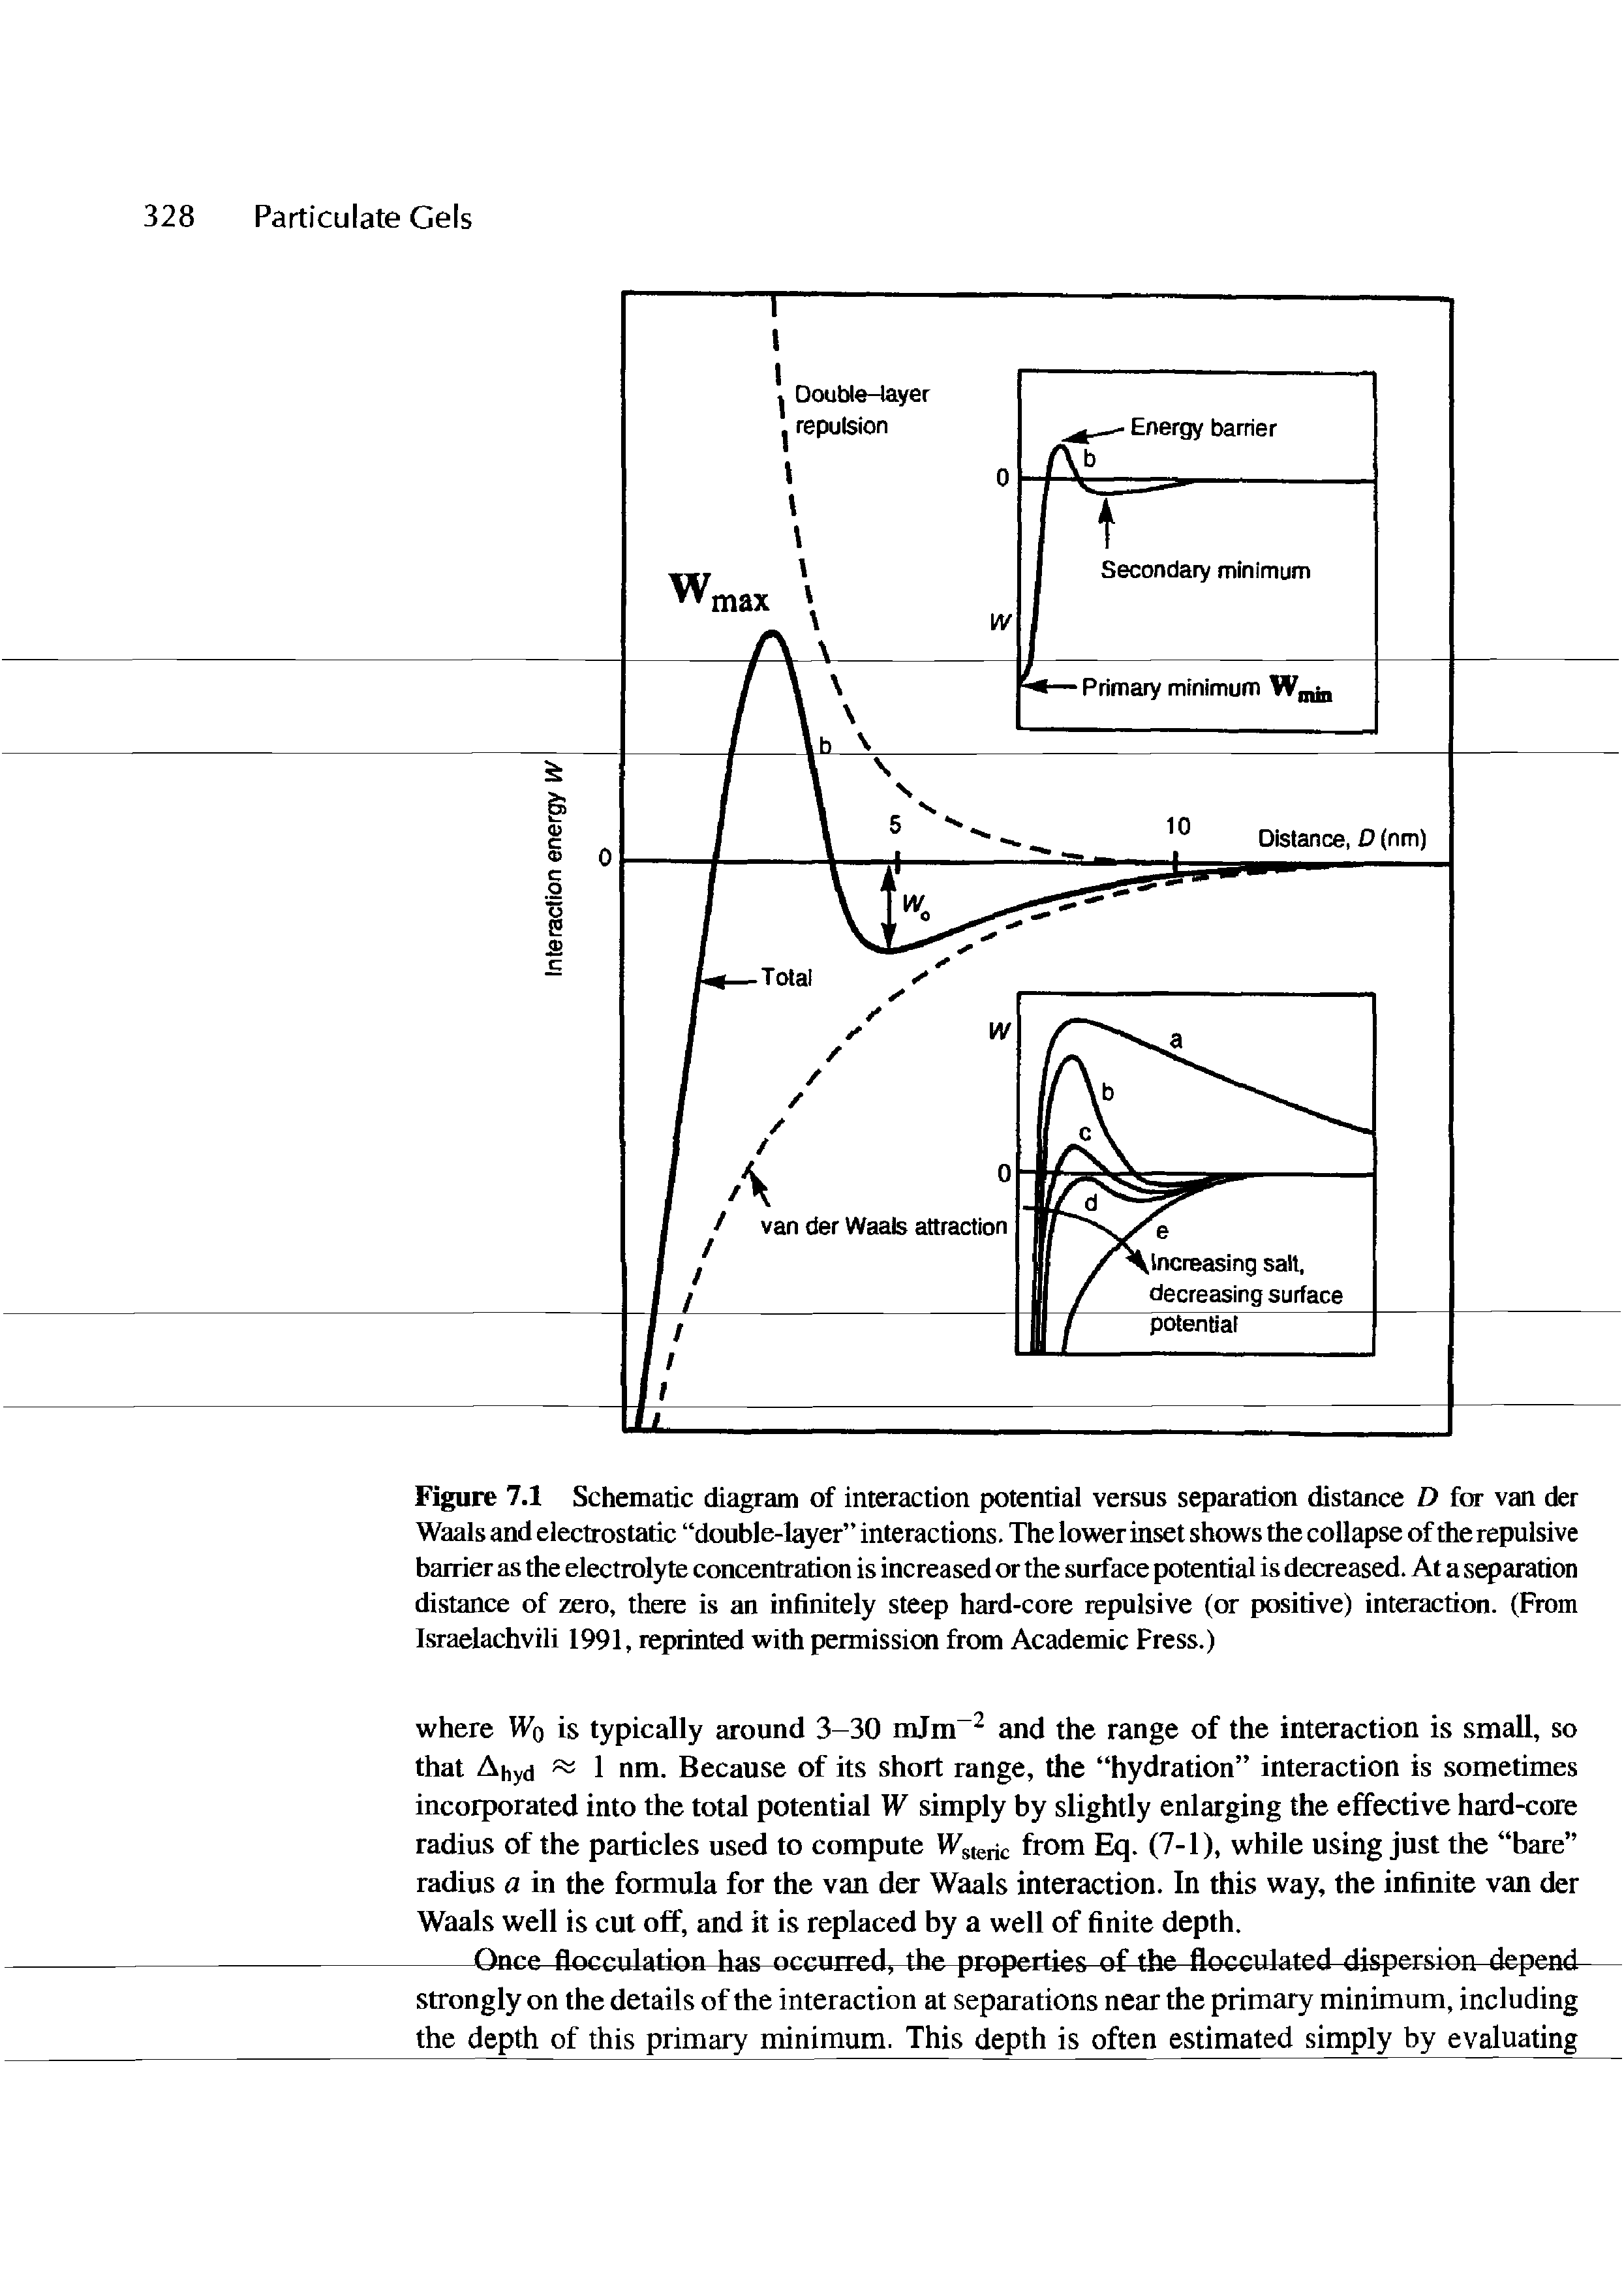 Figure 7.1 Schematic diagram of interaction potential versus separation distance D for van der Waals and electrostatic double-layer interactions. The lower inset shows the collapse of the repulsive barrier as the electrolyte concentration is increased or the surface potential is decreased. At a separation distance of zero, there is an infinitely steep hard-core repulsive (or positive) interaction. (From Israelachvili 1991, reprinted with permission from Academic Press.)...